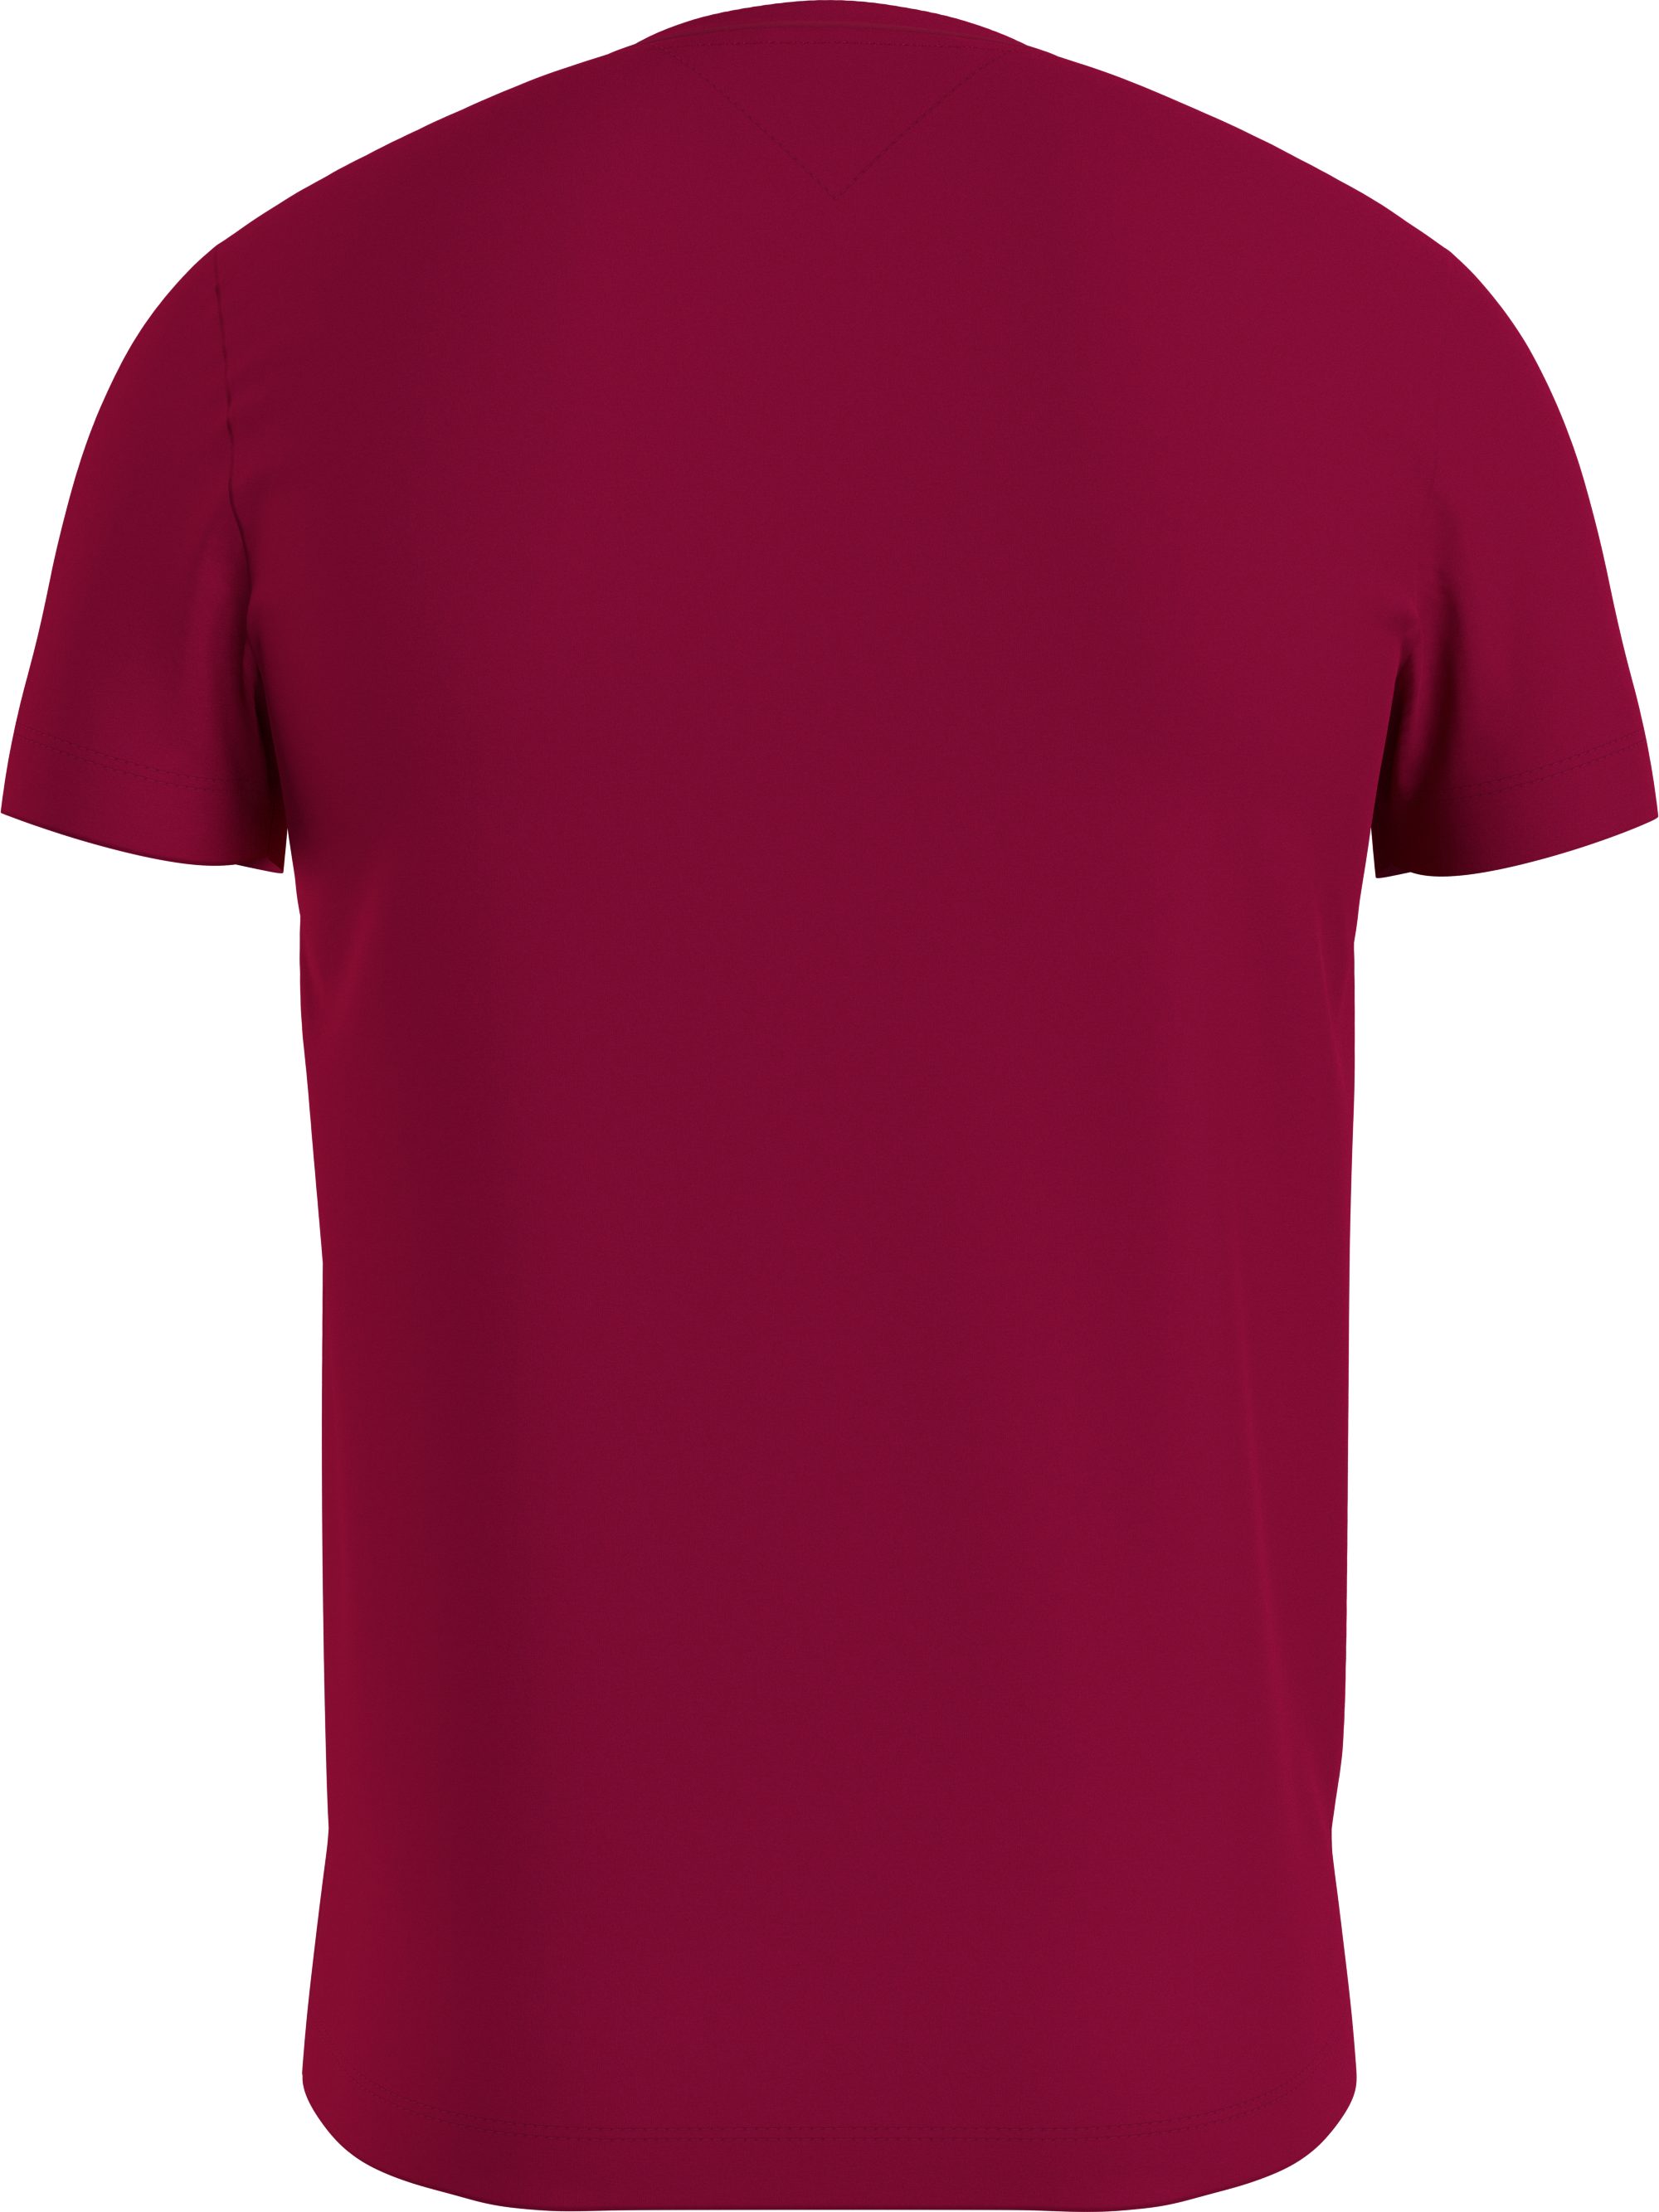 Tommy Hilfiger T-Shirt STRETCH SLIM Berry Royal FIT TEE